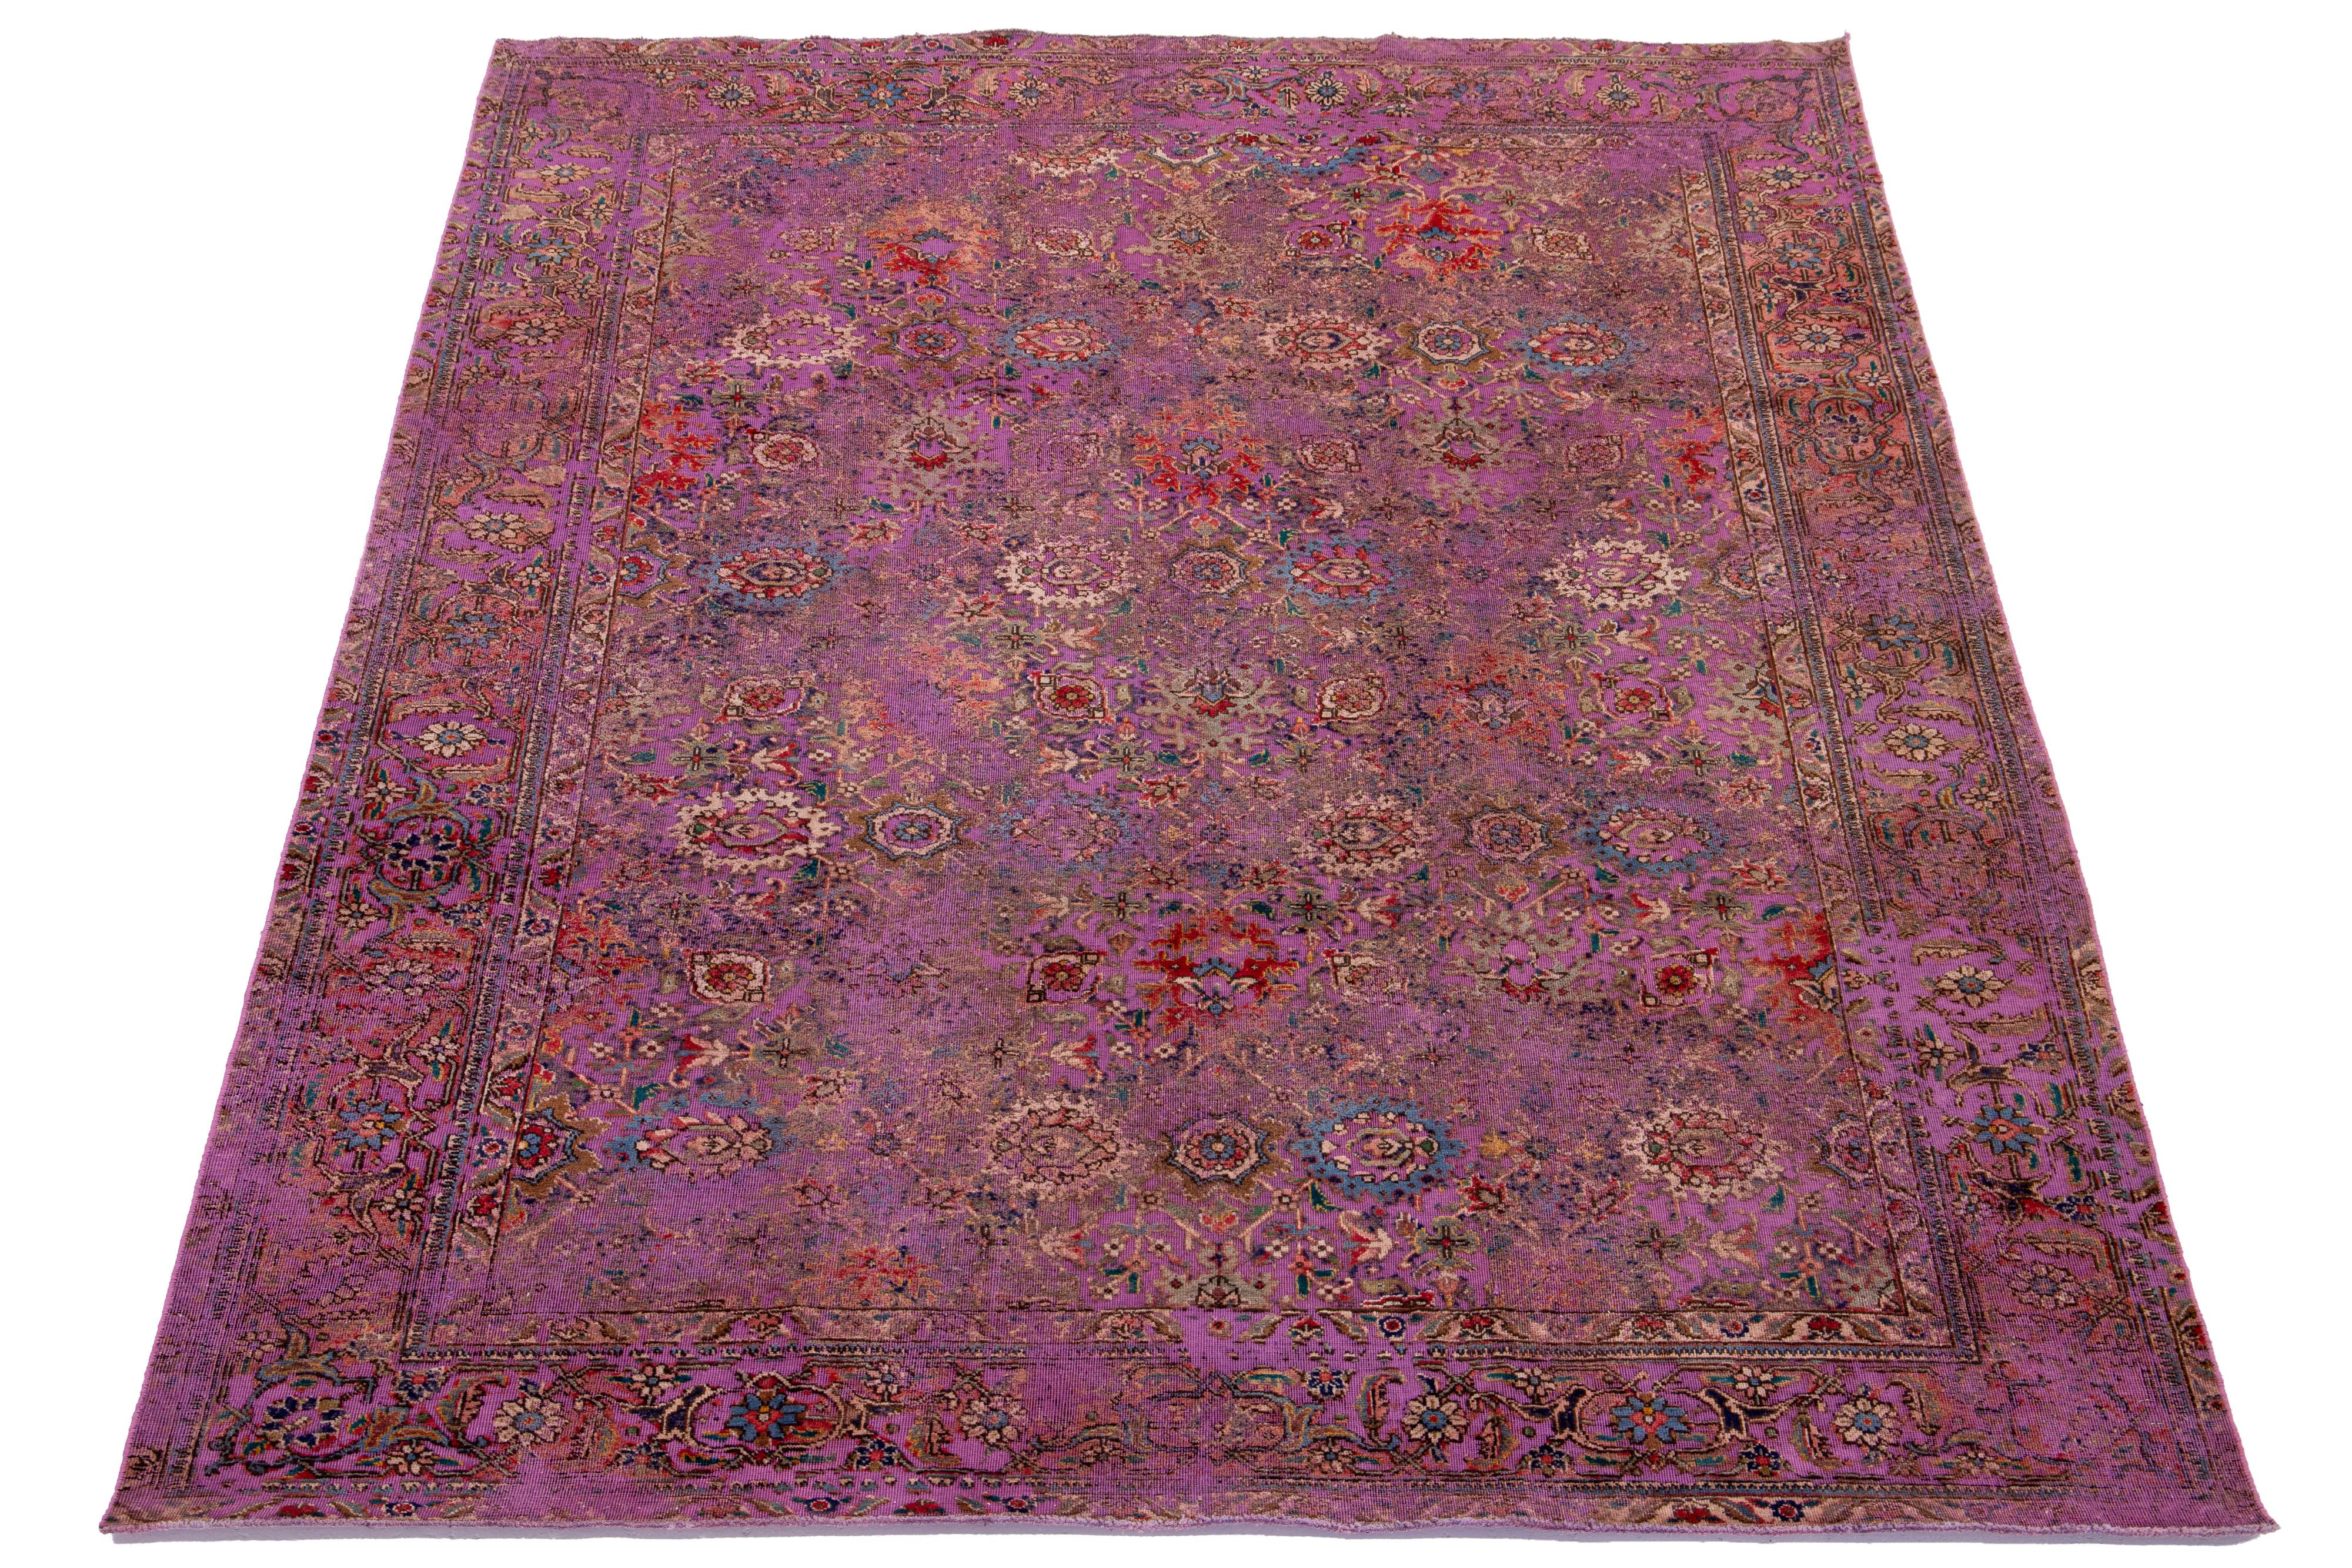 This antique purple Persian wool rug showcases a beautiful floral design with vibrant multicolor accents.

This rug measures 7'4'' x 10'5